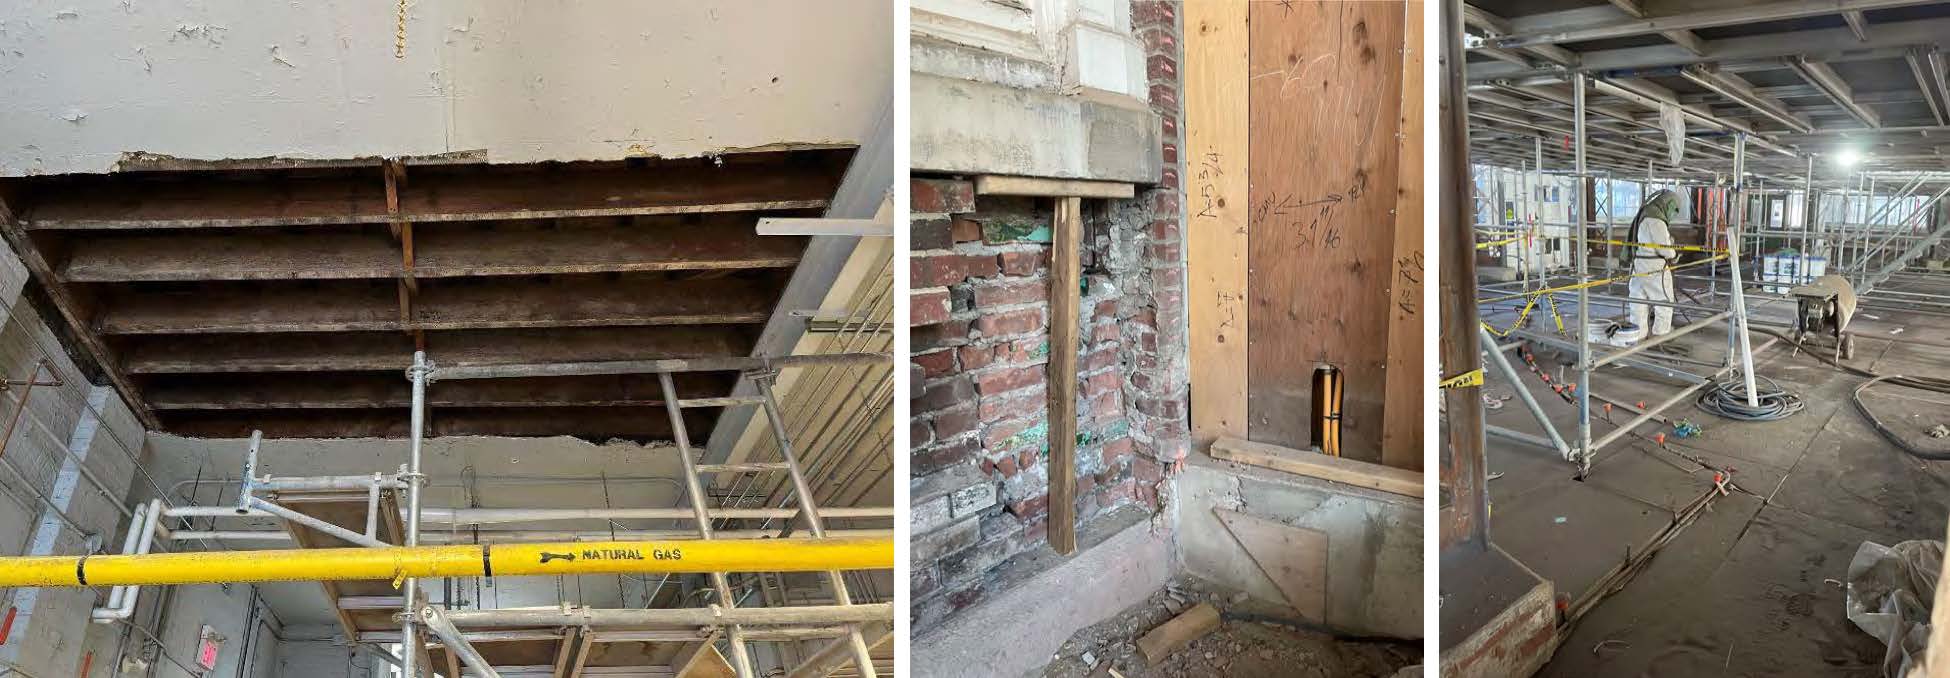 A photograph with three images side by side showing the interior work happening at the Palm House building. On the left, shows roof structure supports. In the middle, shows a brick wall undergoing masonry restoration. On the right, steel structural beams being primed for painting.